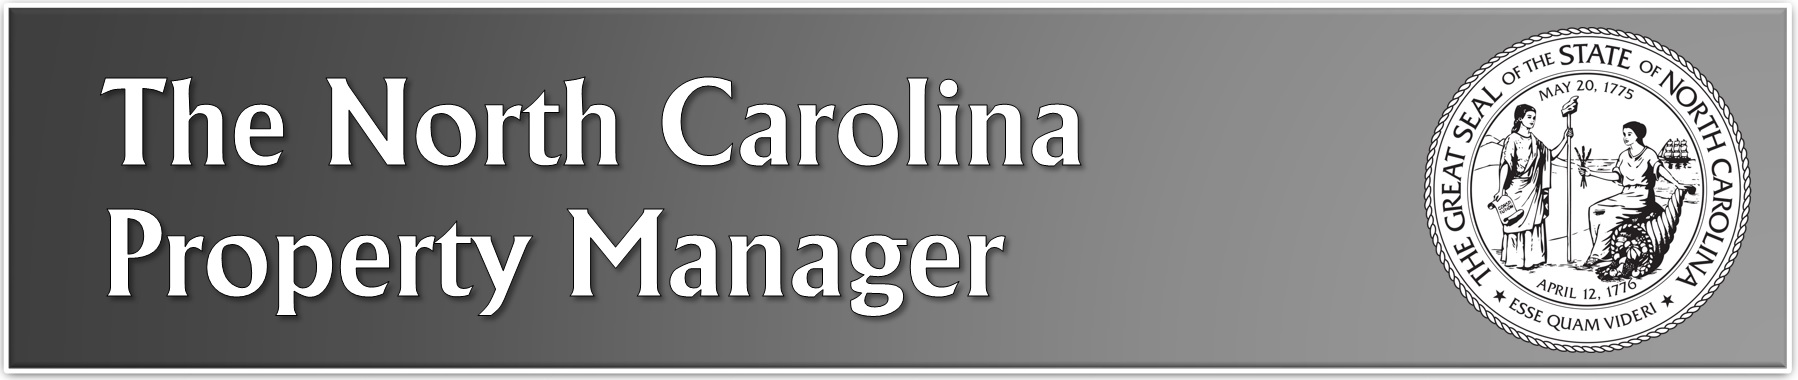 The NC Property Manager